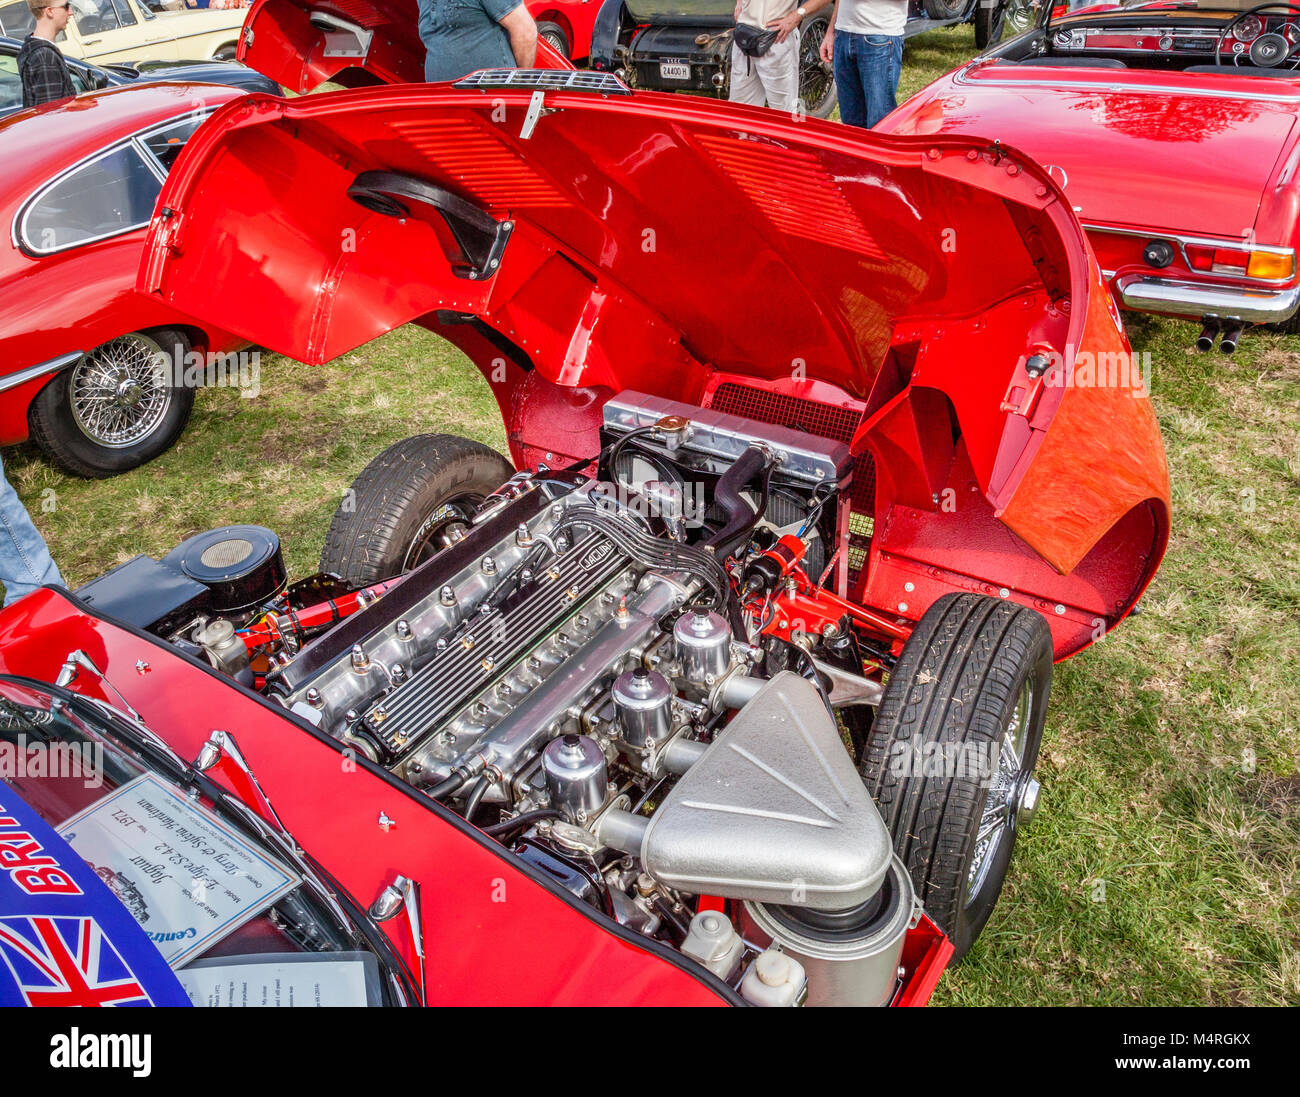 Australia, New South Wales, Central Coast, The Entrance, view of the XK engine of a Jaguar E-Type British sports car, exhibited during the Central Coa Stock Photo